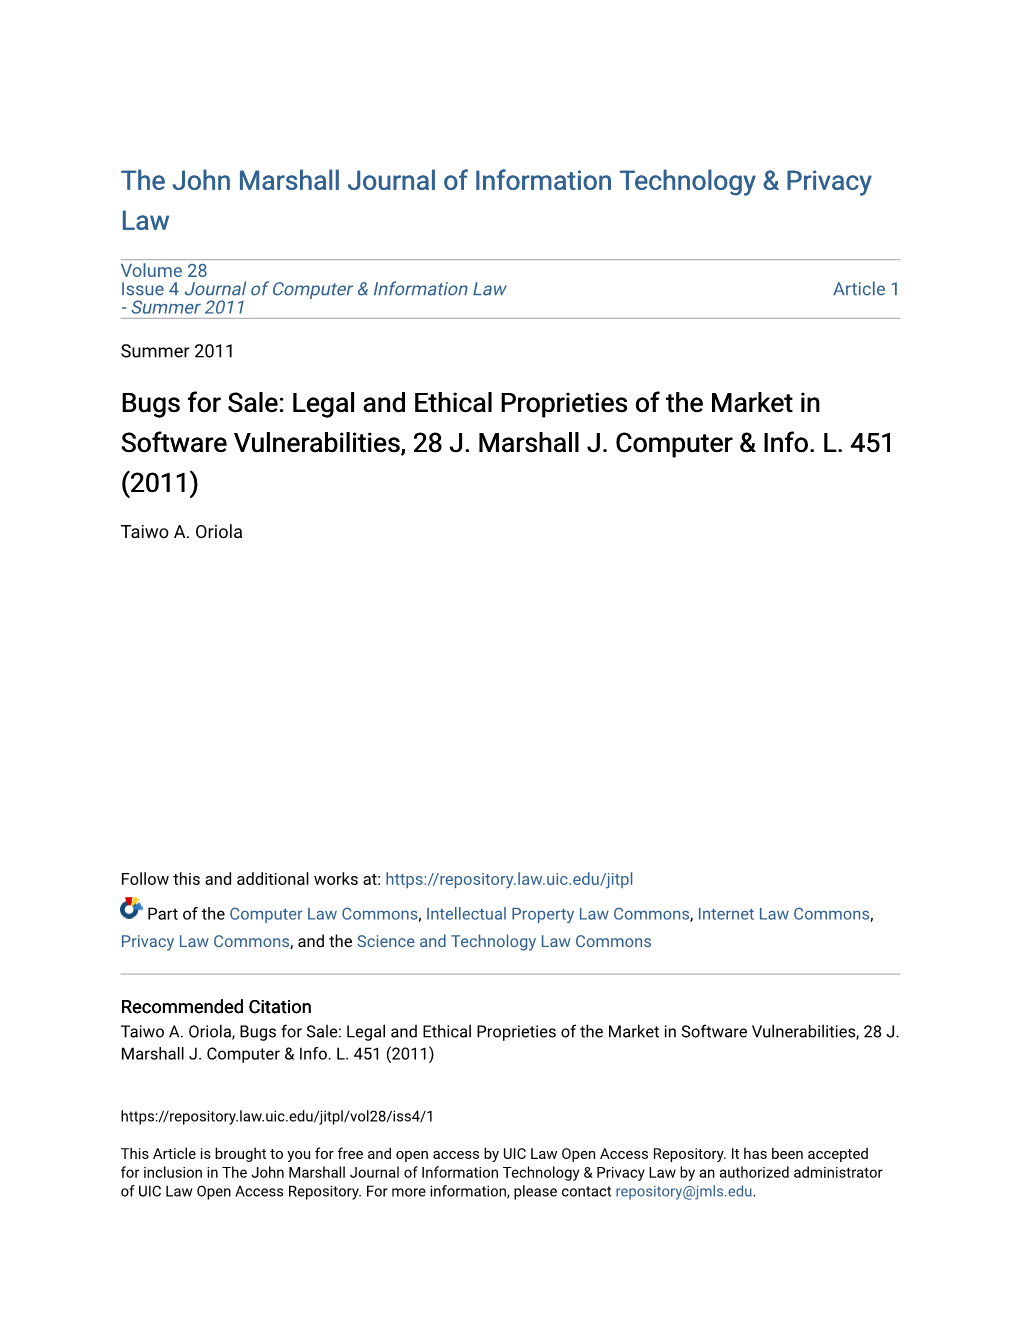 Bugs for Sale: Legal and Ethical Proprieties of the Market in Software Vulnerabilities, 28 J